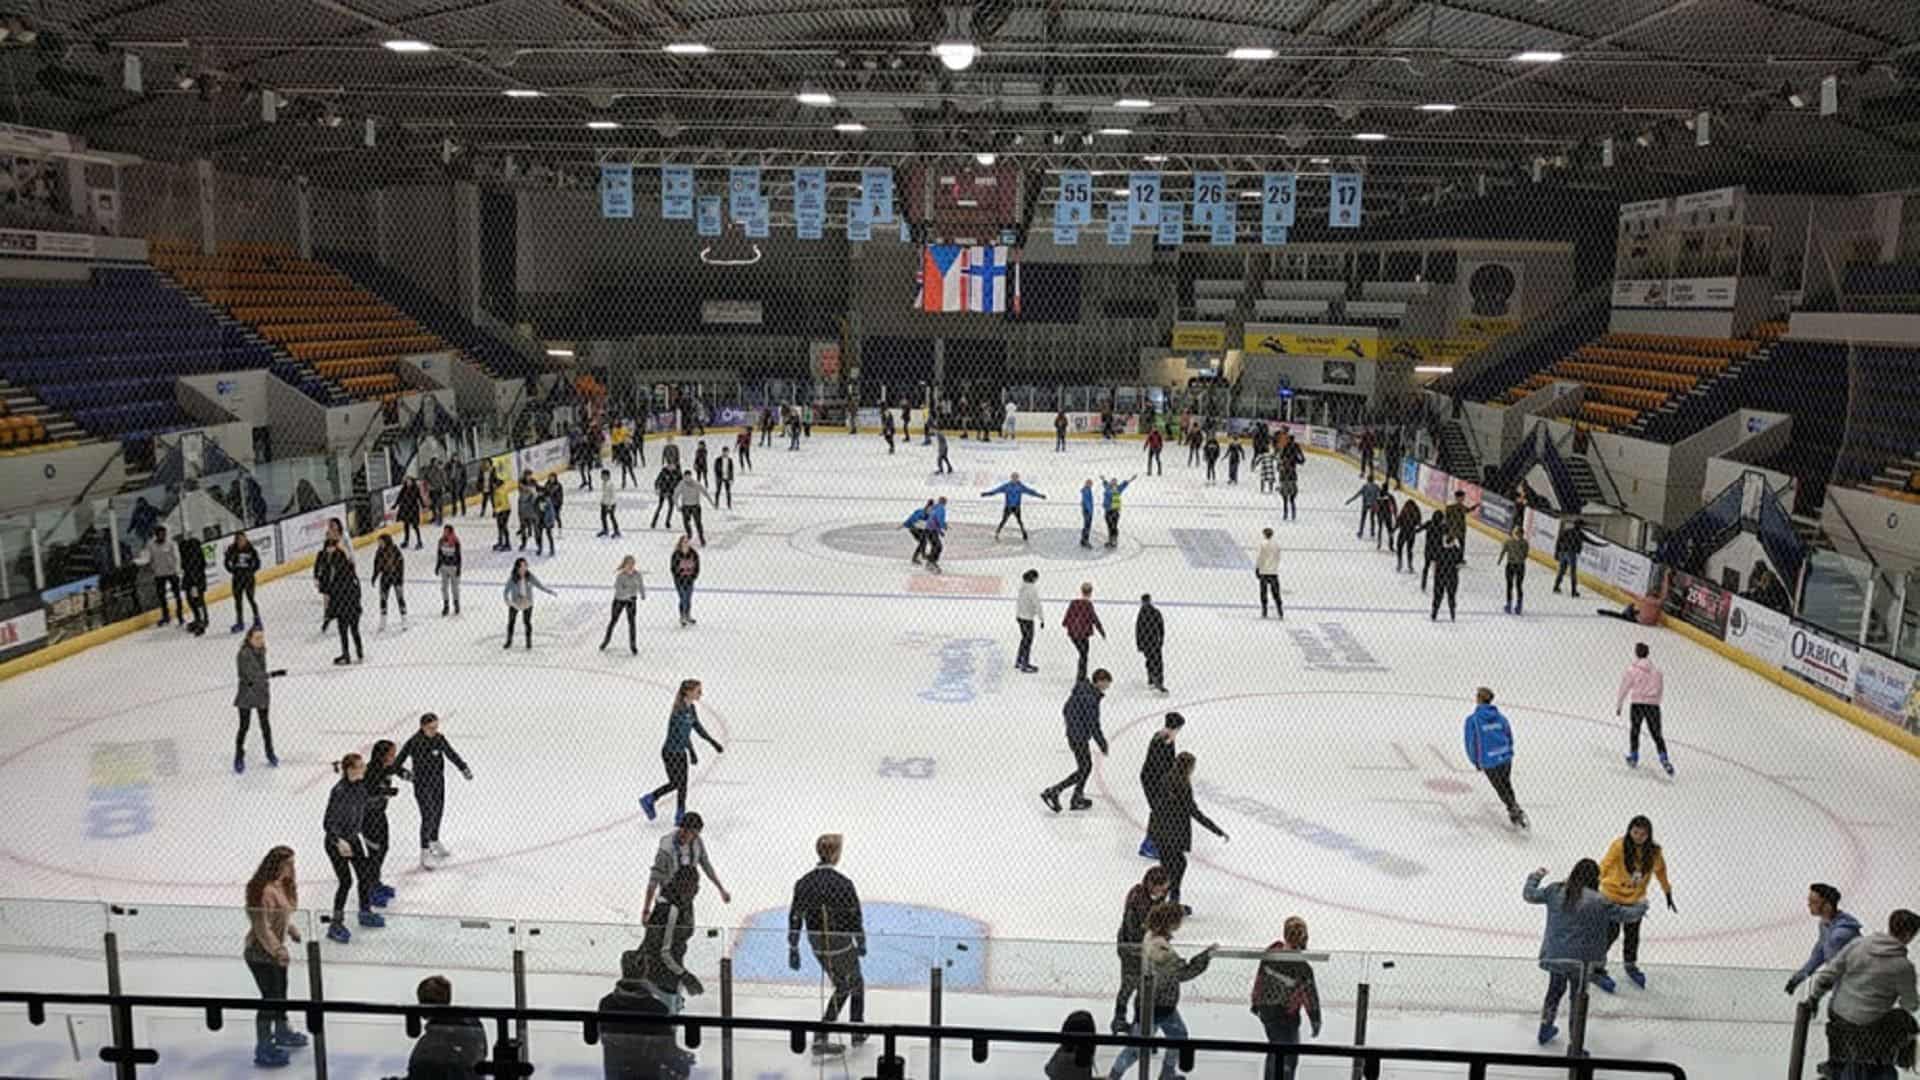 Planet Ice Coventry in UK